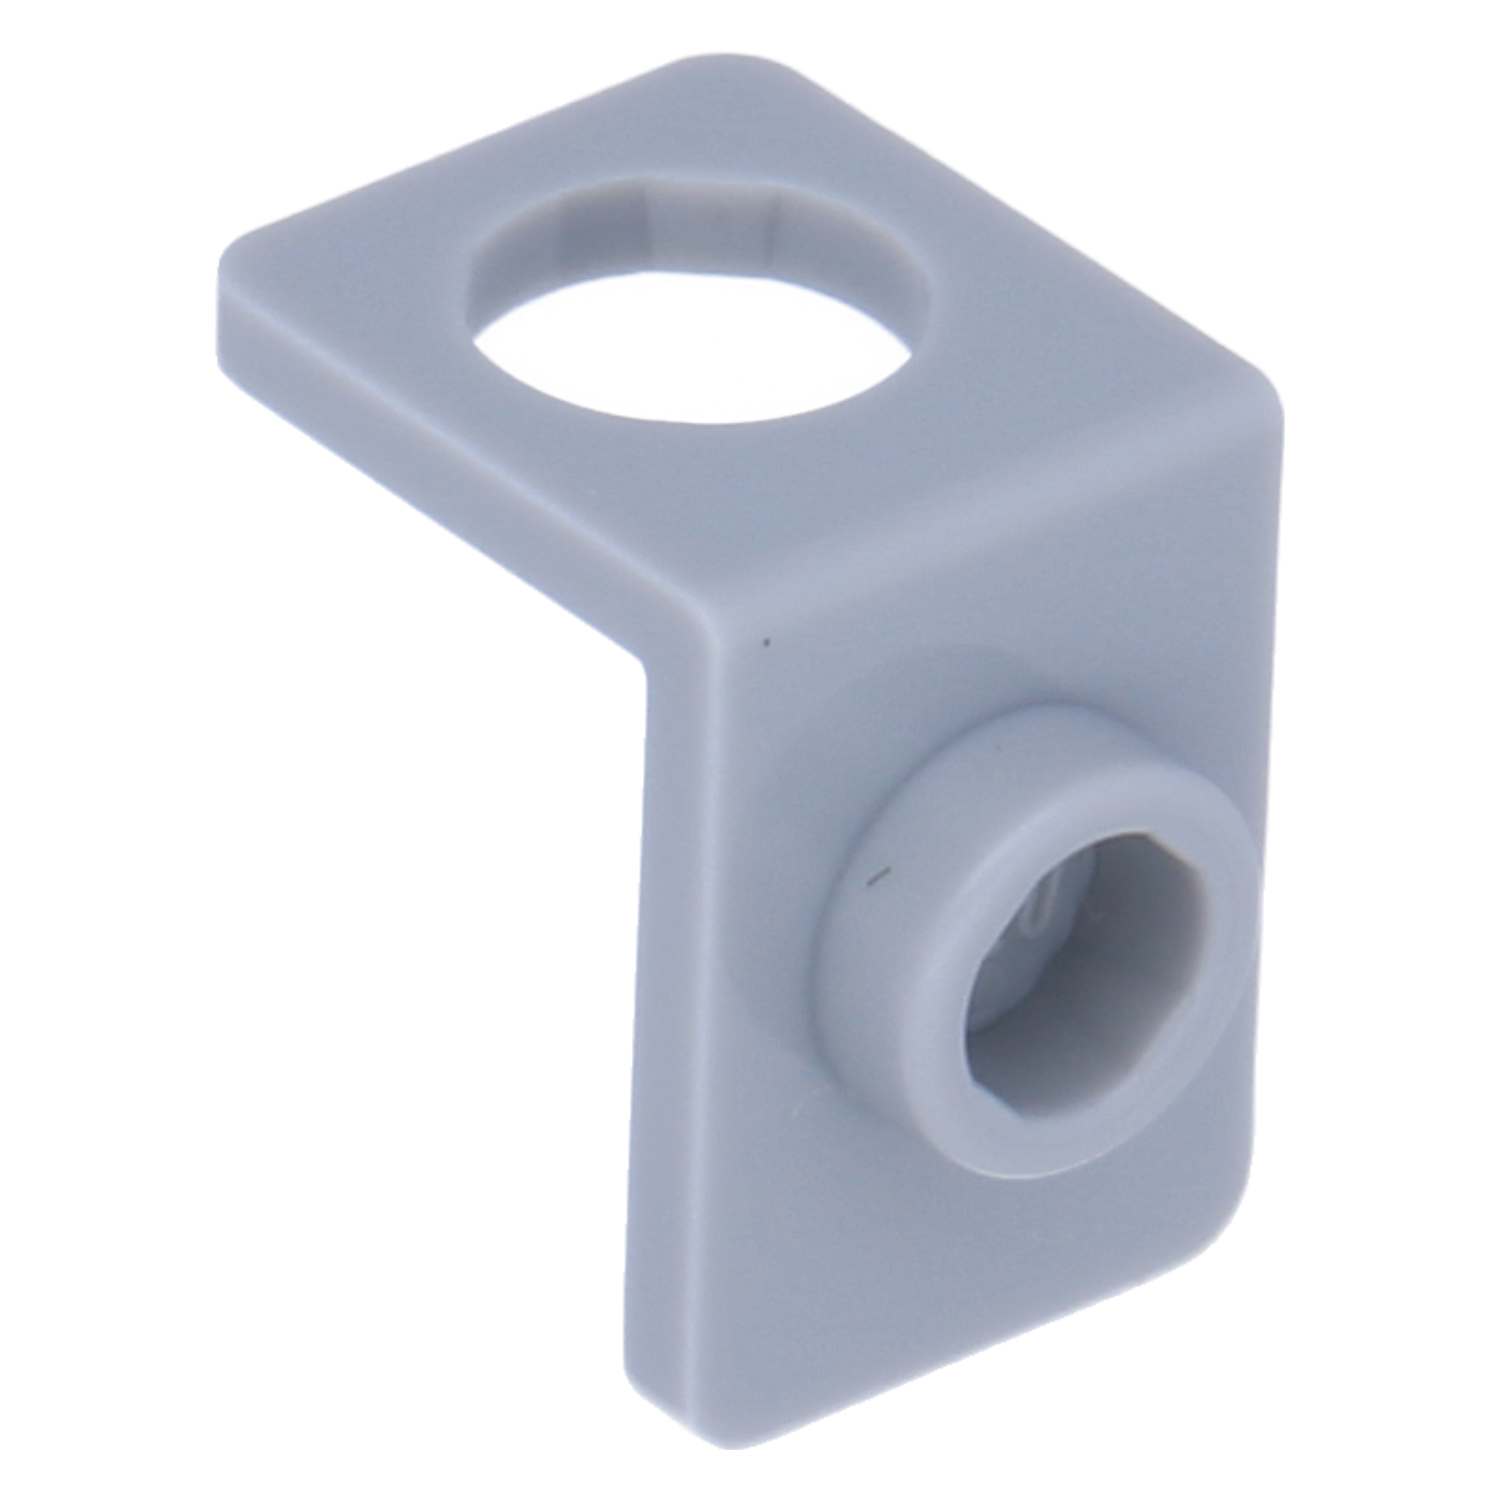 LEGO Minifigures Accessories (other) - neck bracket (thin back wall)